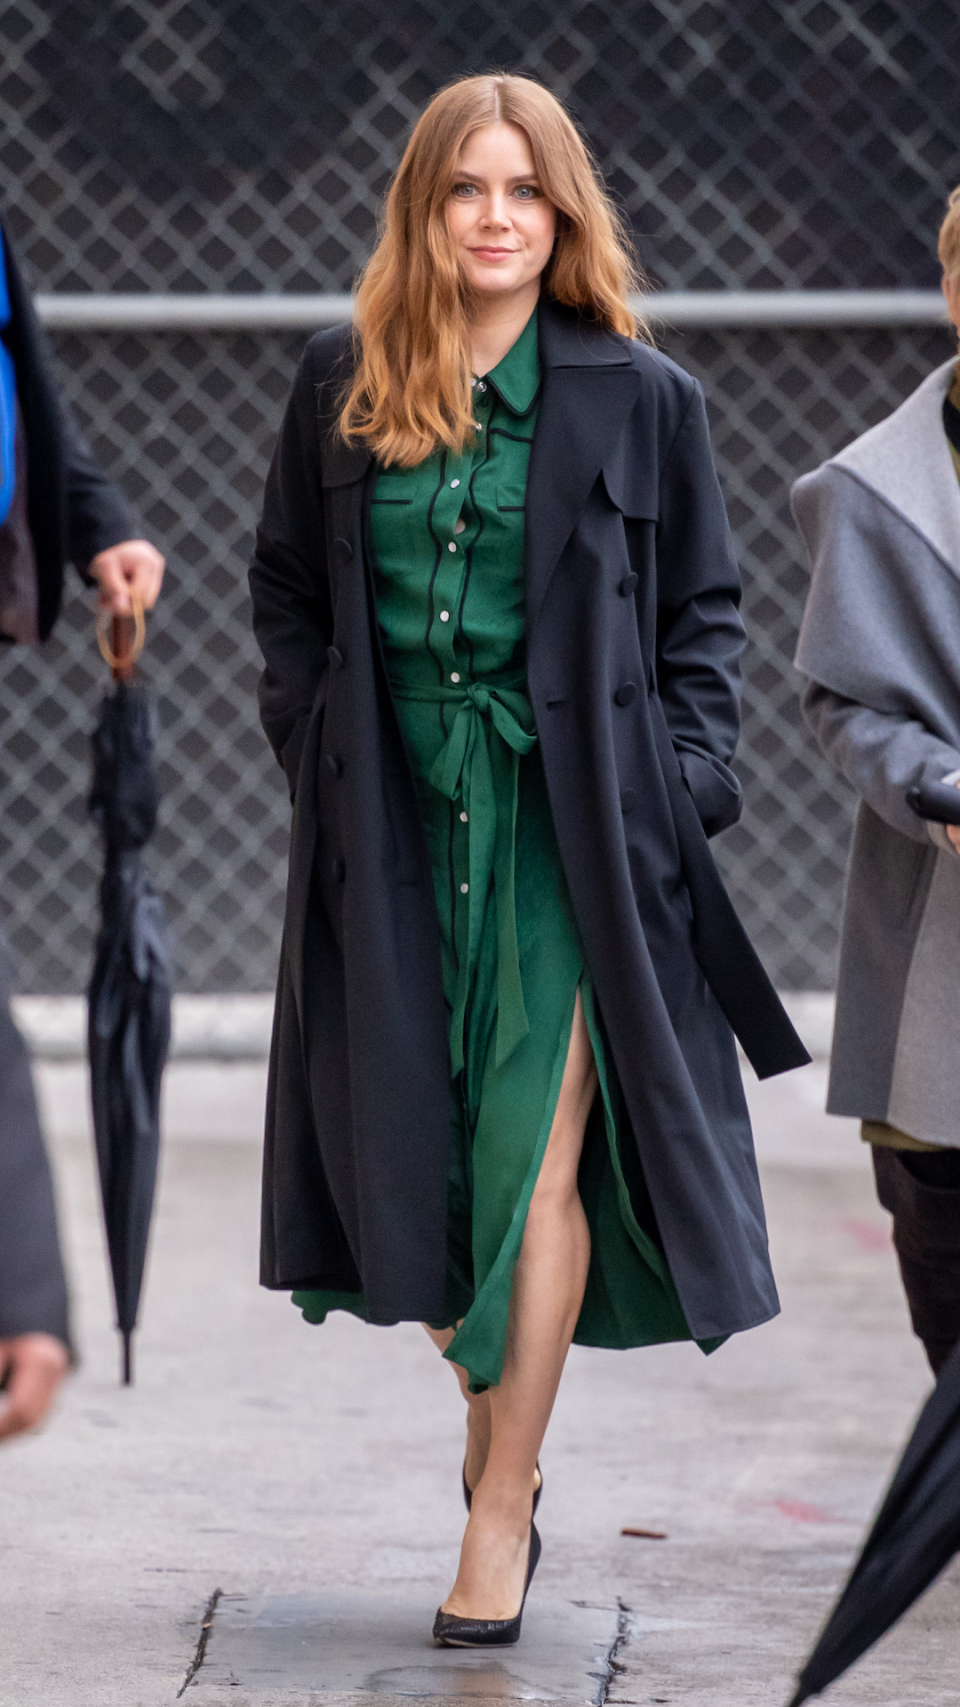 <p> A trench coat can make an ideal stylish cover-up for in-between temperatures. Adams wore the classic outerwear in a chic navy shade, over an emerald green shirt dress, to visit the Los Angeles studios of Jimmy Kimmel Live in 2019.  </p>